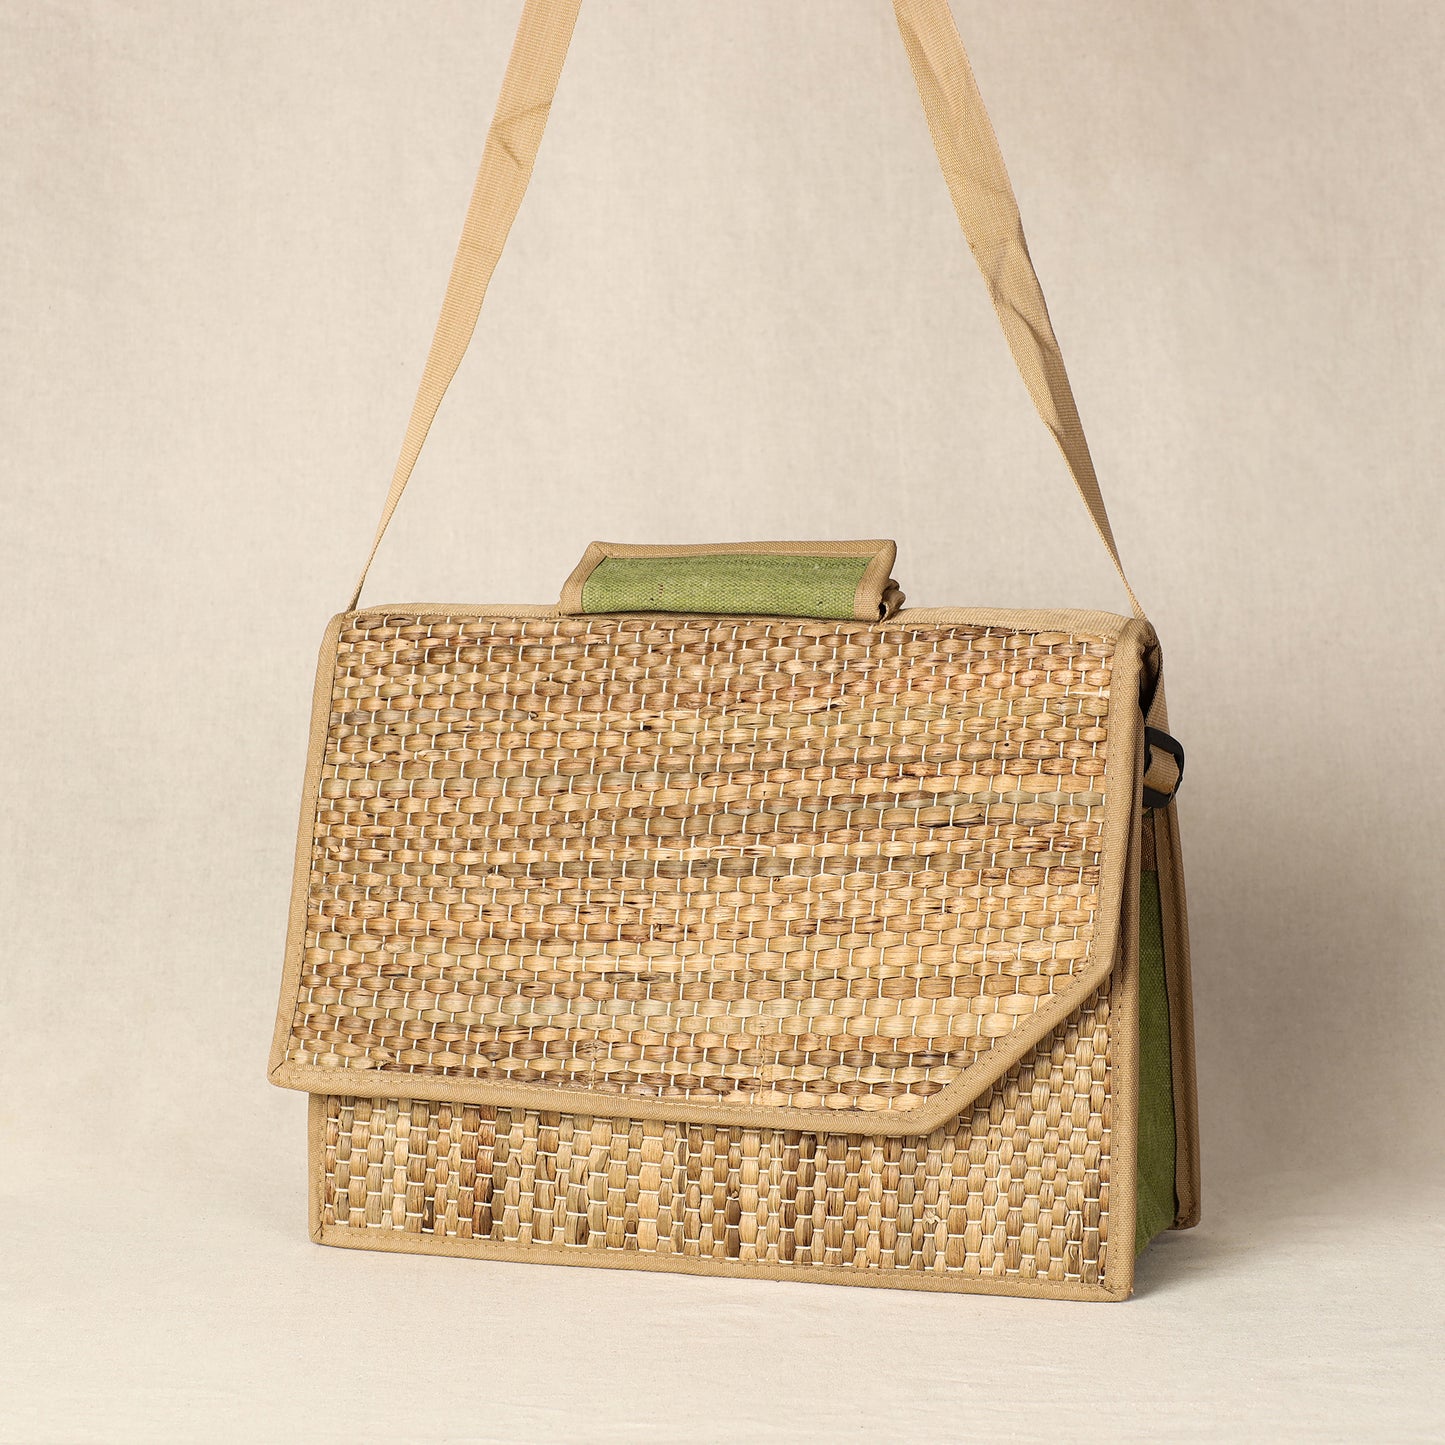 water hyacinth conference bag